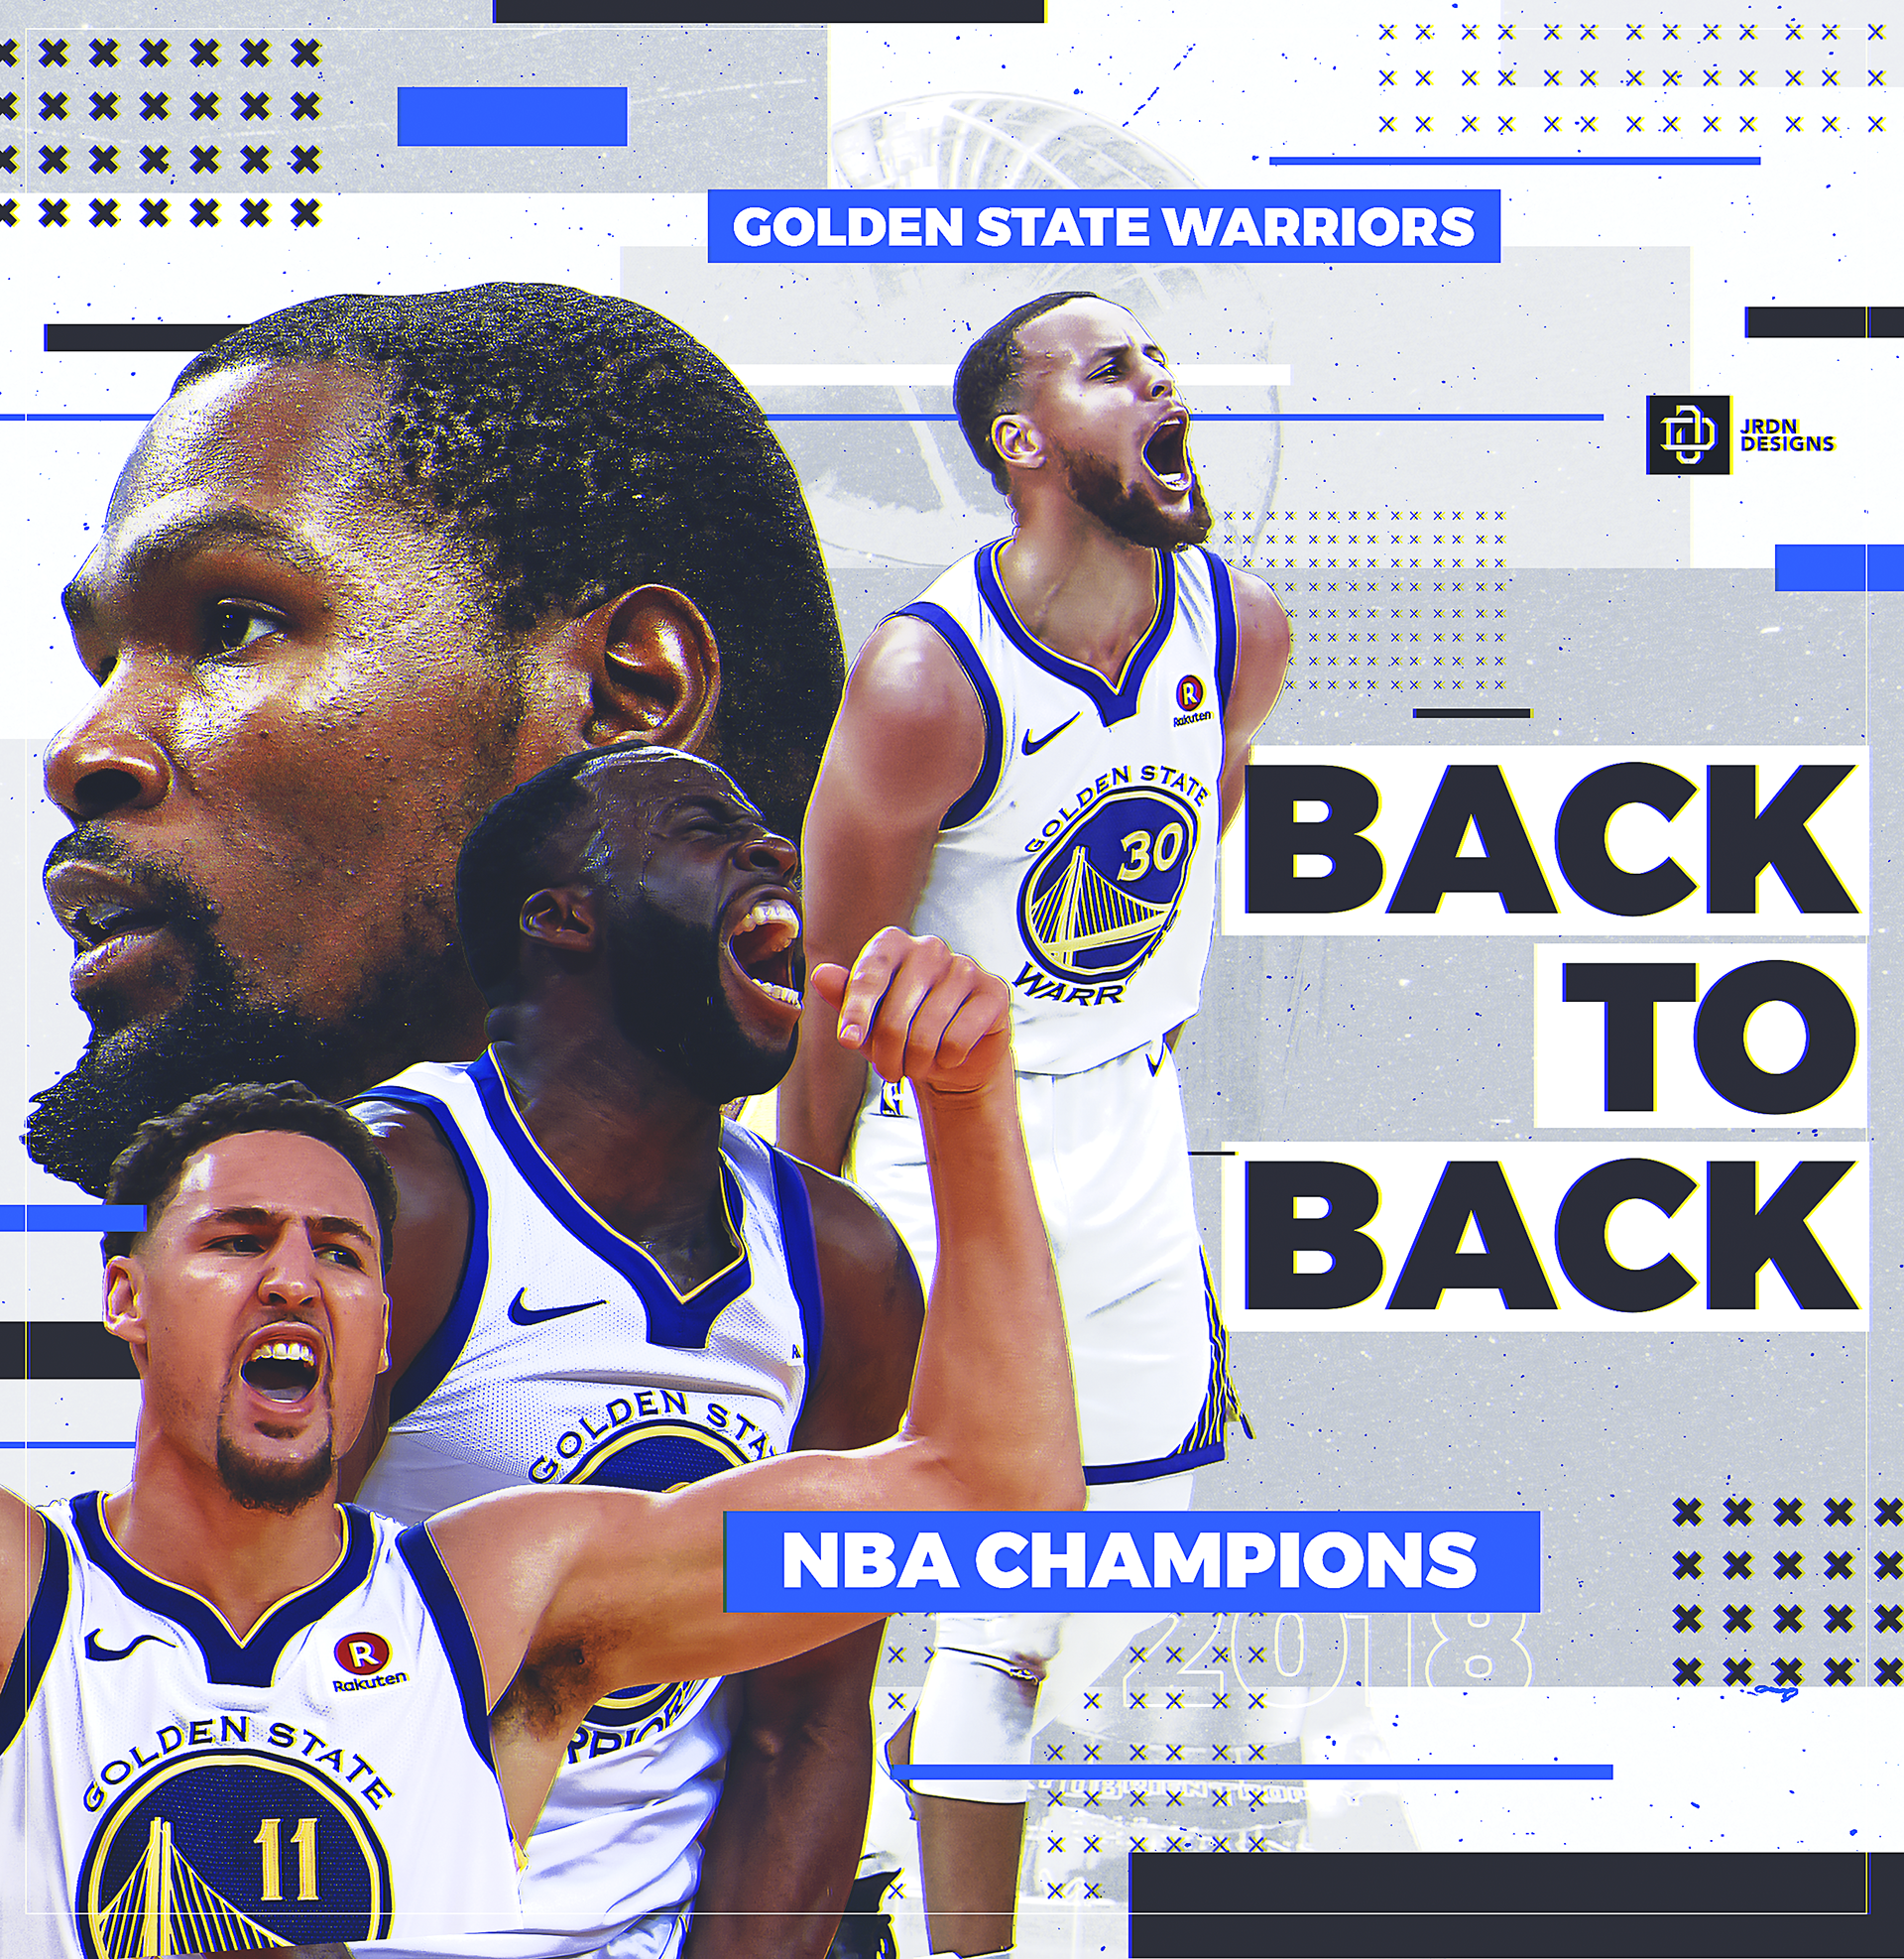 Back-to-back champion Warriors dealt with back-to-back challenges